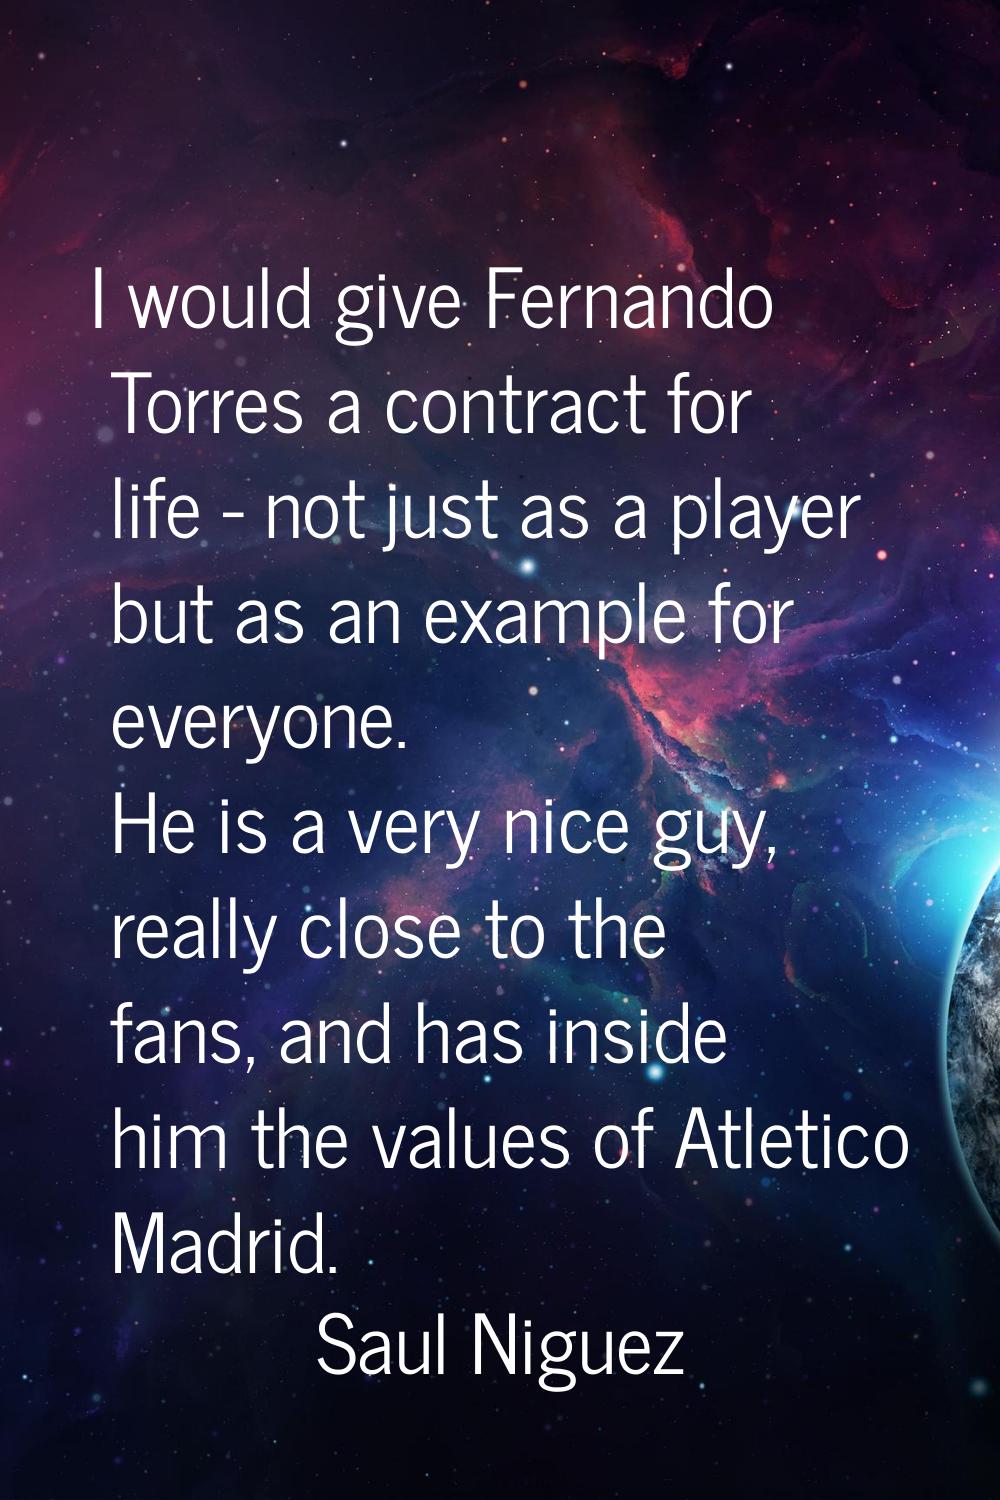 I would give Fernando Torres a contract for life - not just as a player but as an example for every